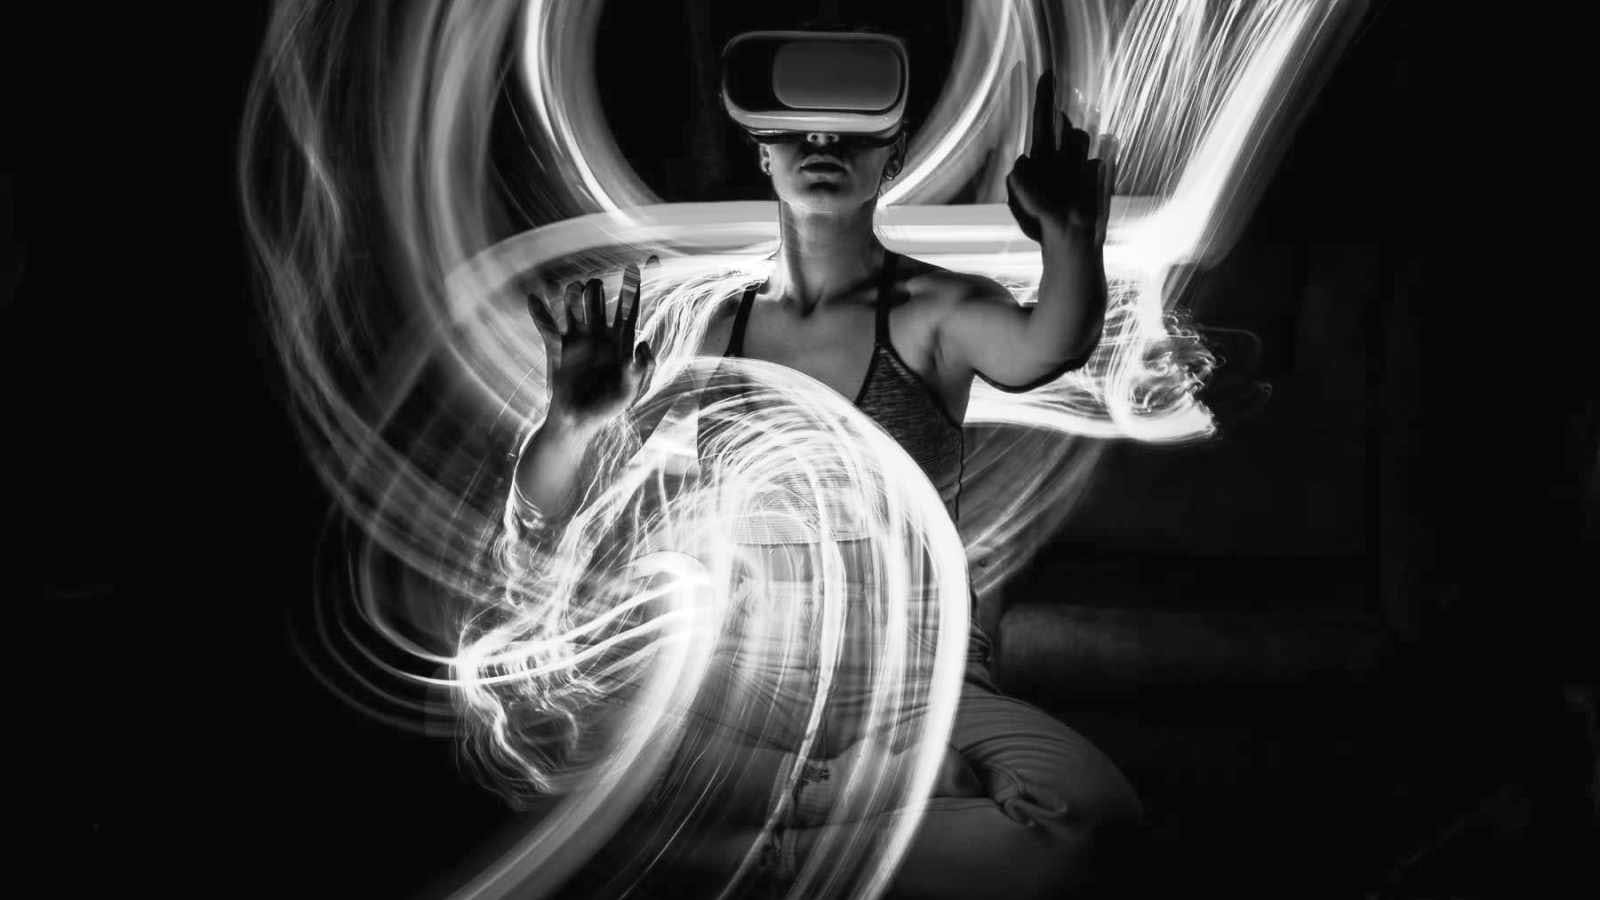 Supporting Artists and Elevating Fan Experiences With Mixed Reality